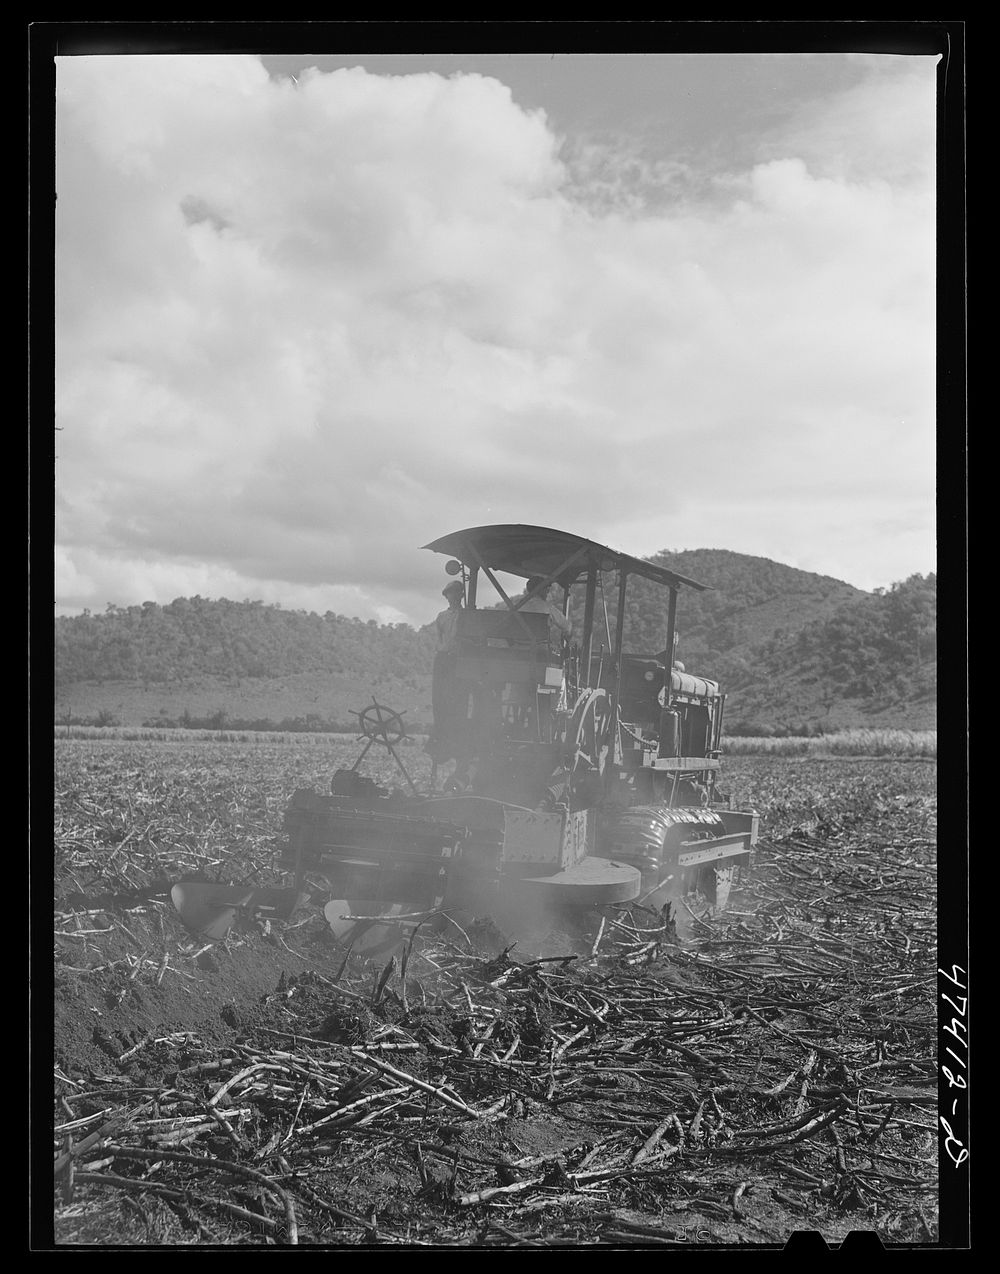 [Untitled photo, possibly related to: Guanica, Puerto Rico (vicinity). A "gyrotiller" plowing a sugar cane field]. Sourced…